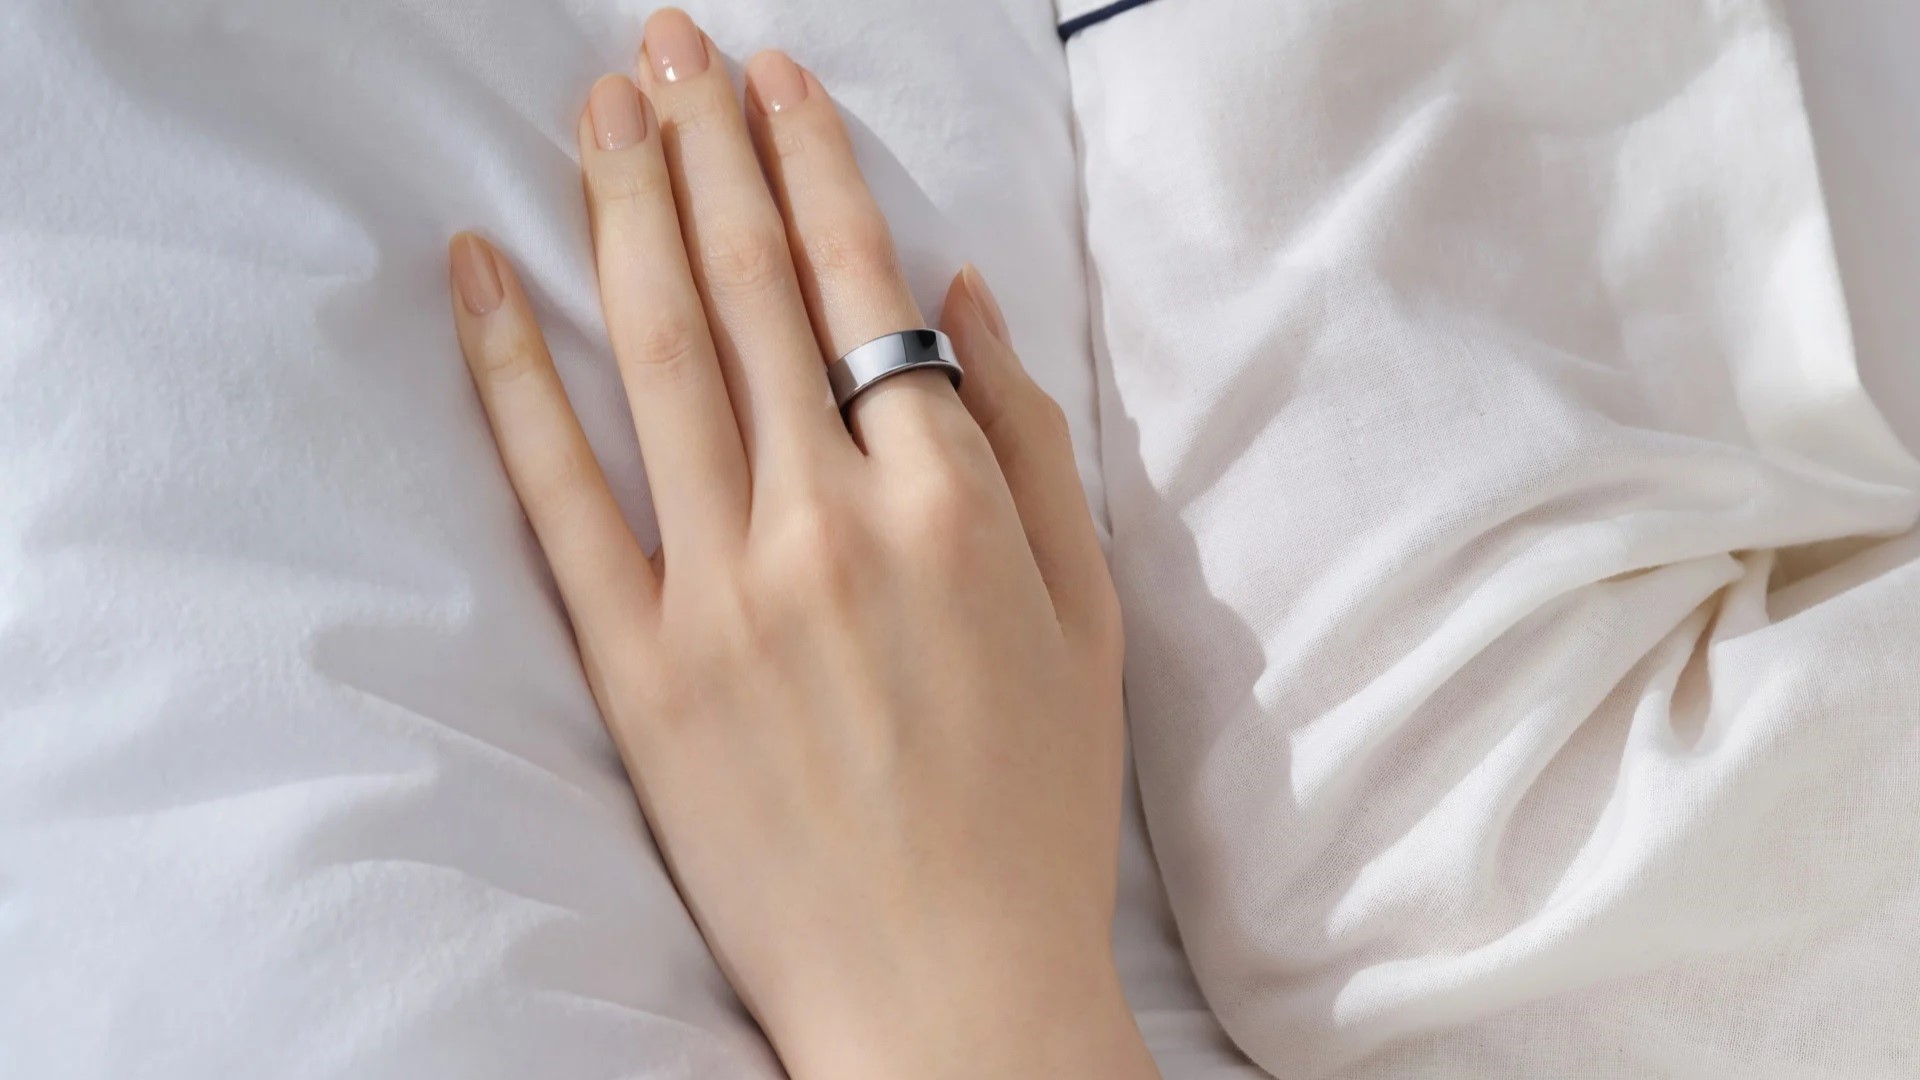 Samsung’s Galaxy Ring Promises a Connected Future of Health and Wellness